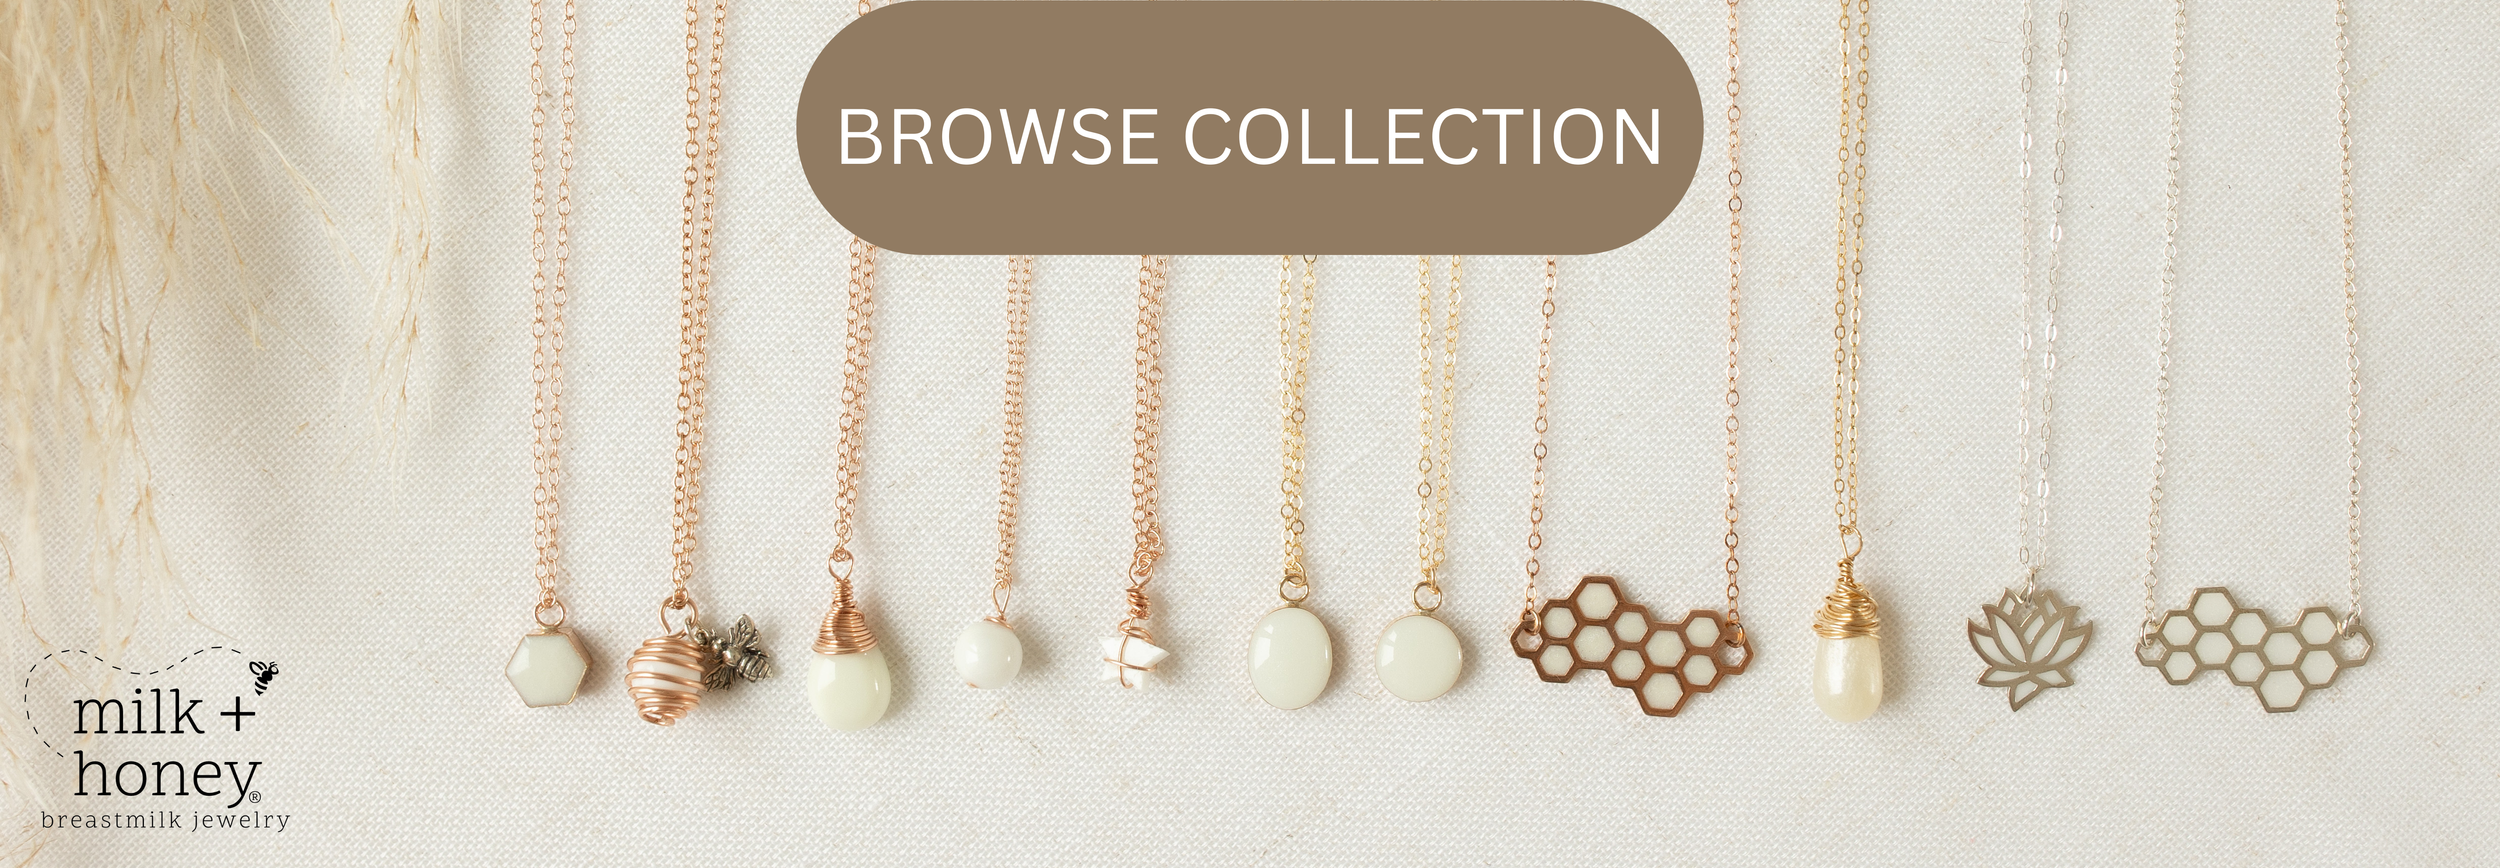 DIY Breast milk Jewelry Kit. Available from my  store! Link in